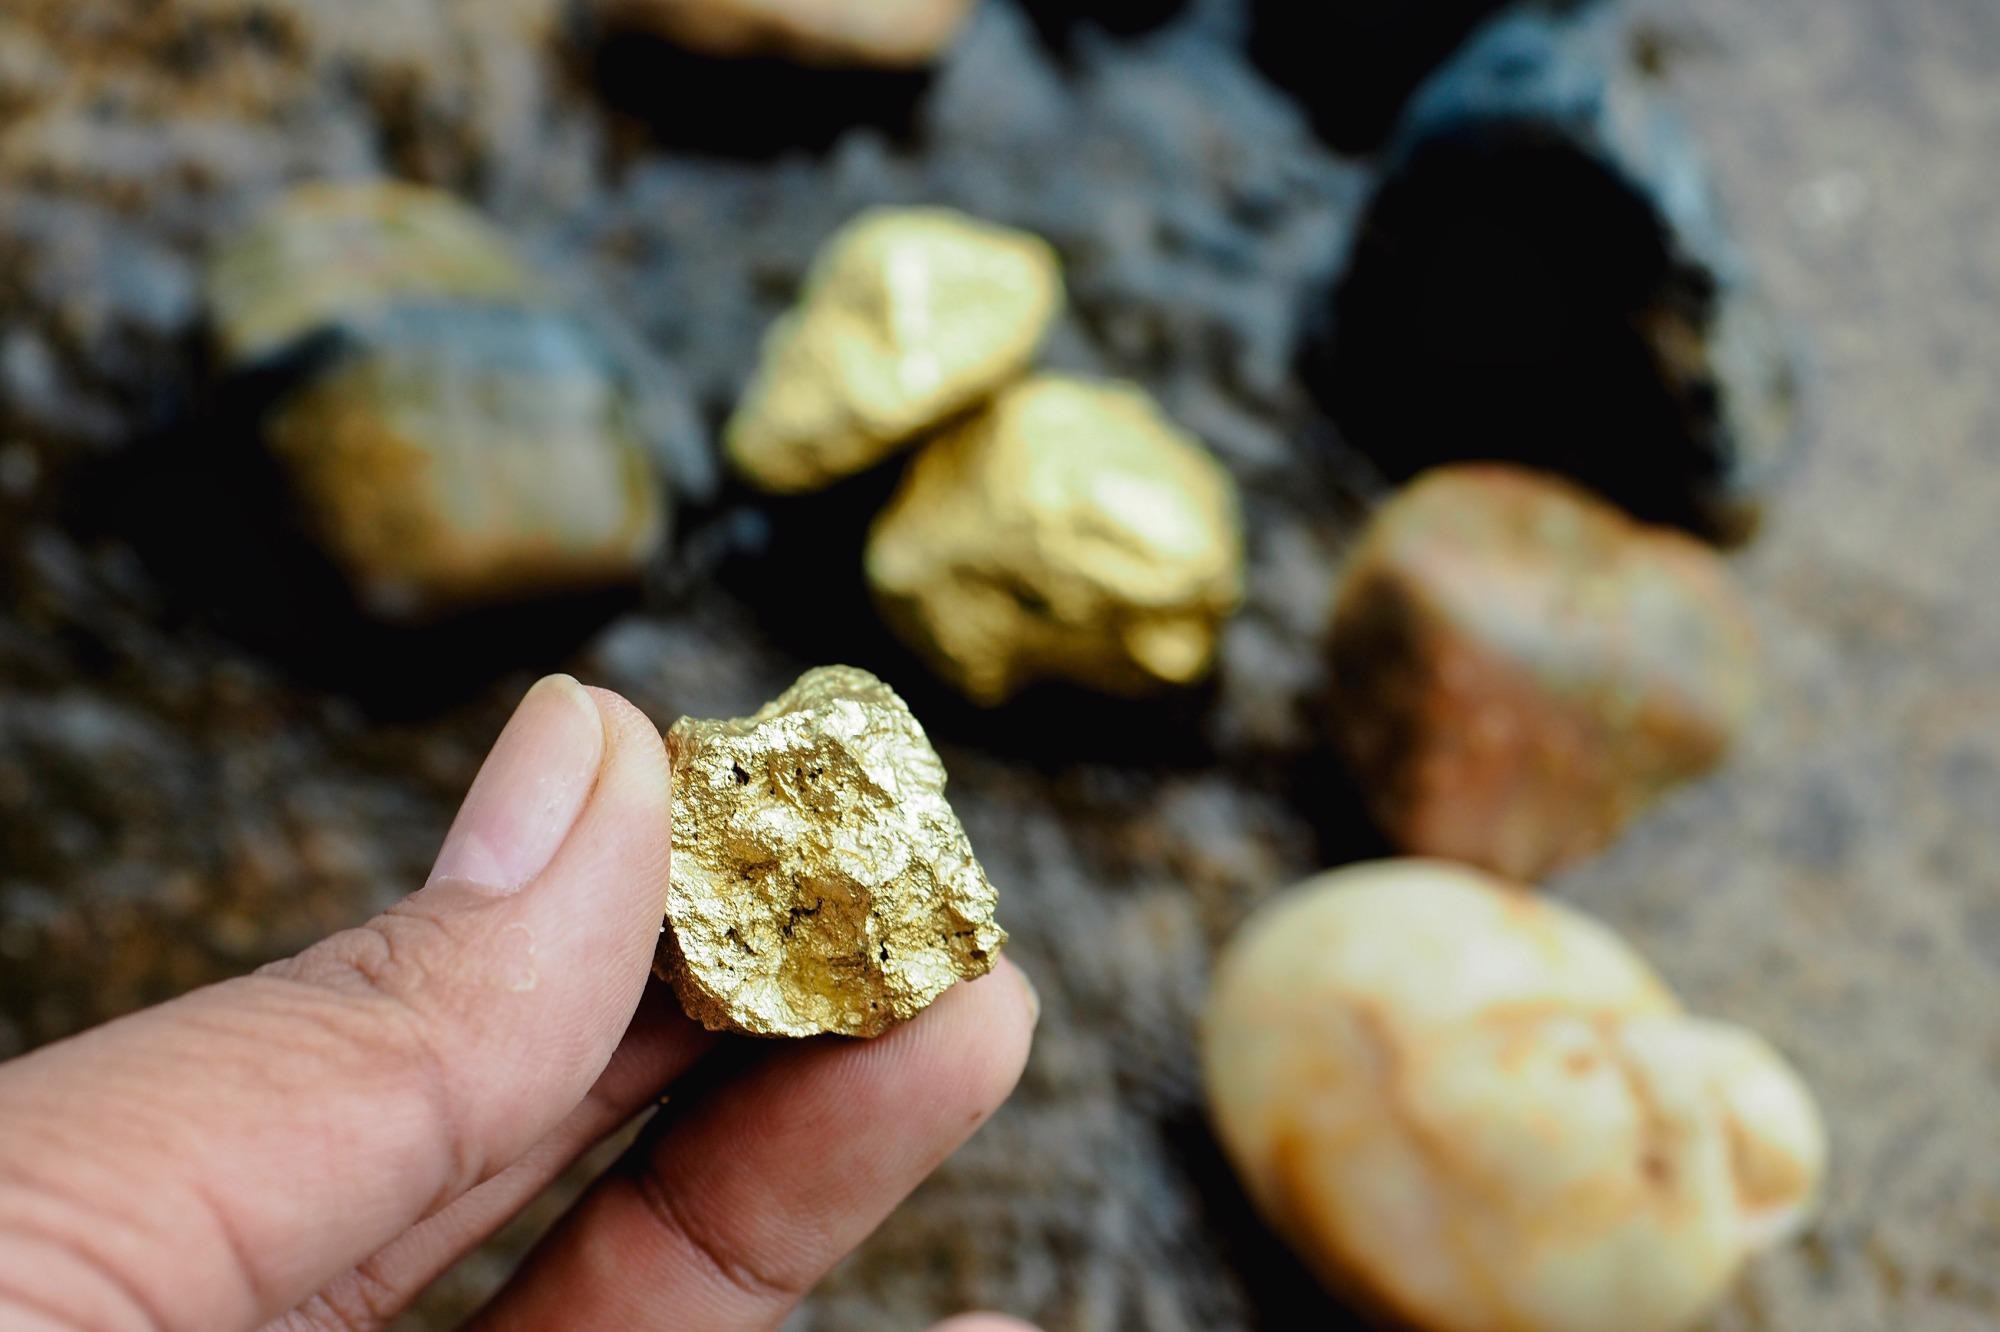 Revival Gold Offers Update on Drill Program and Exploration at Beartrack-Arnett Gold Project.